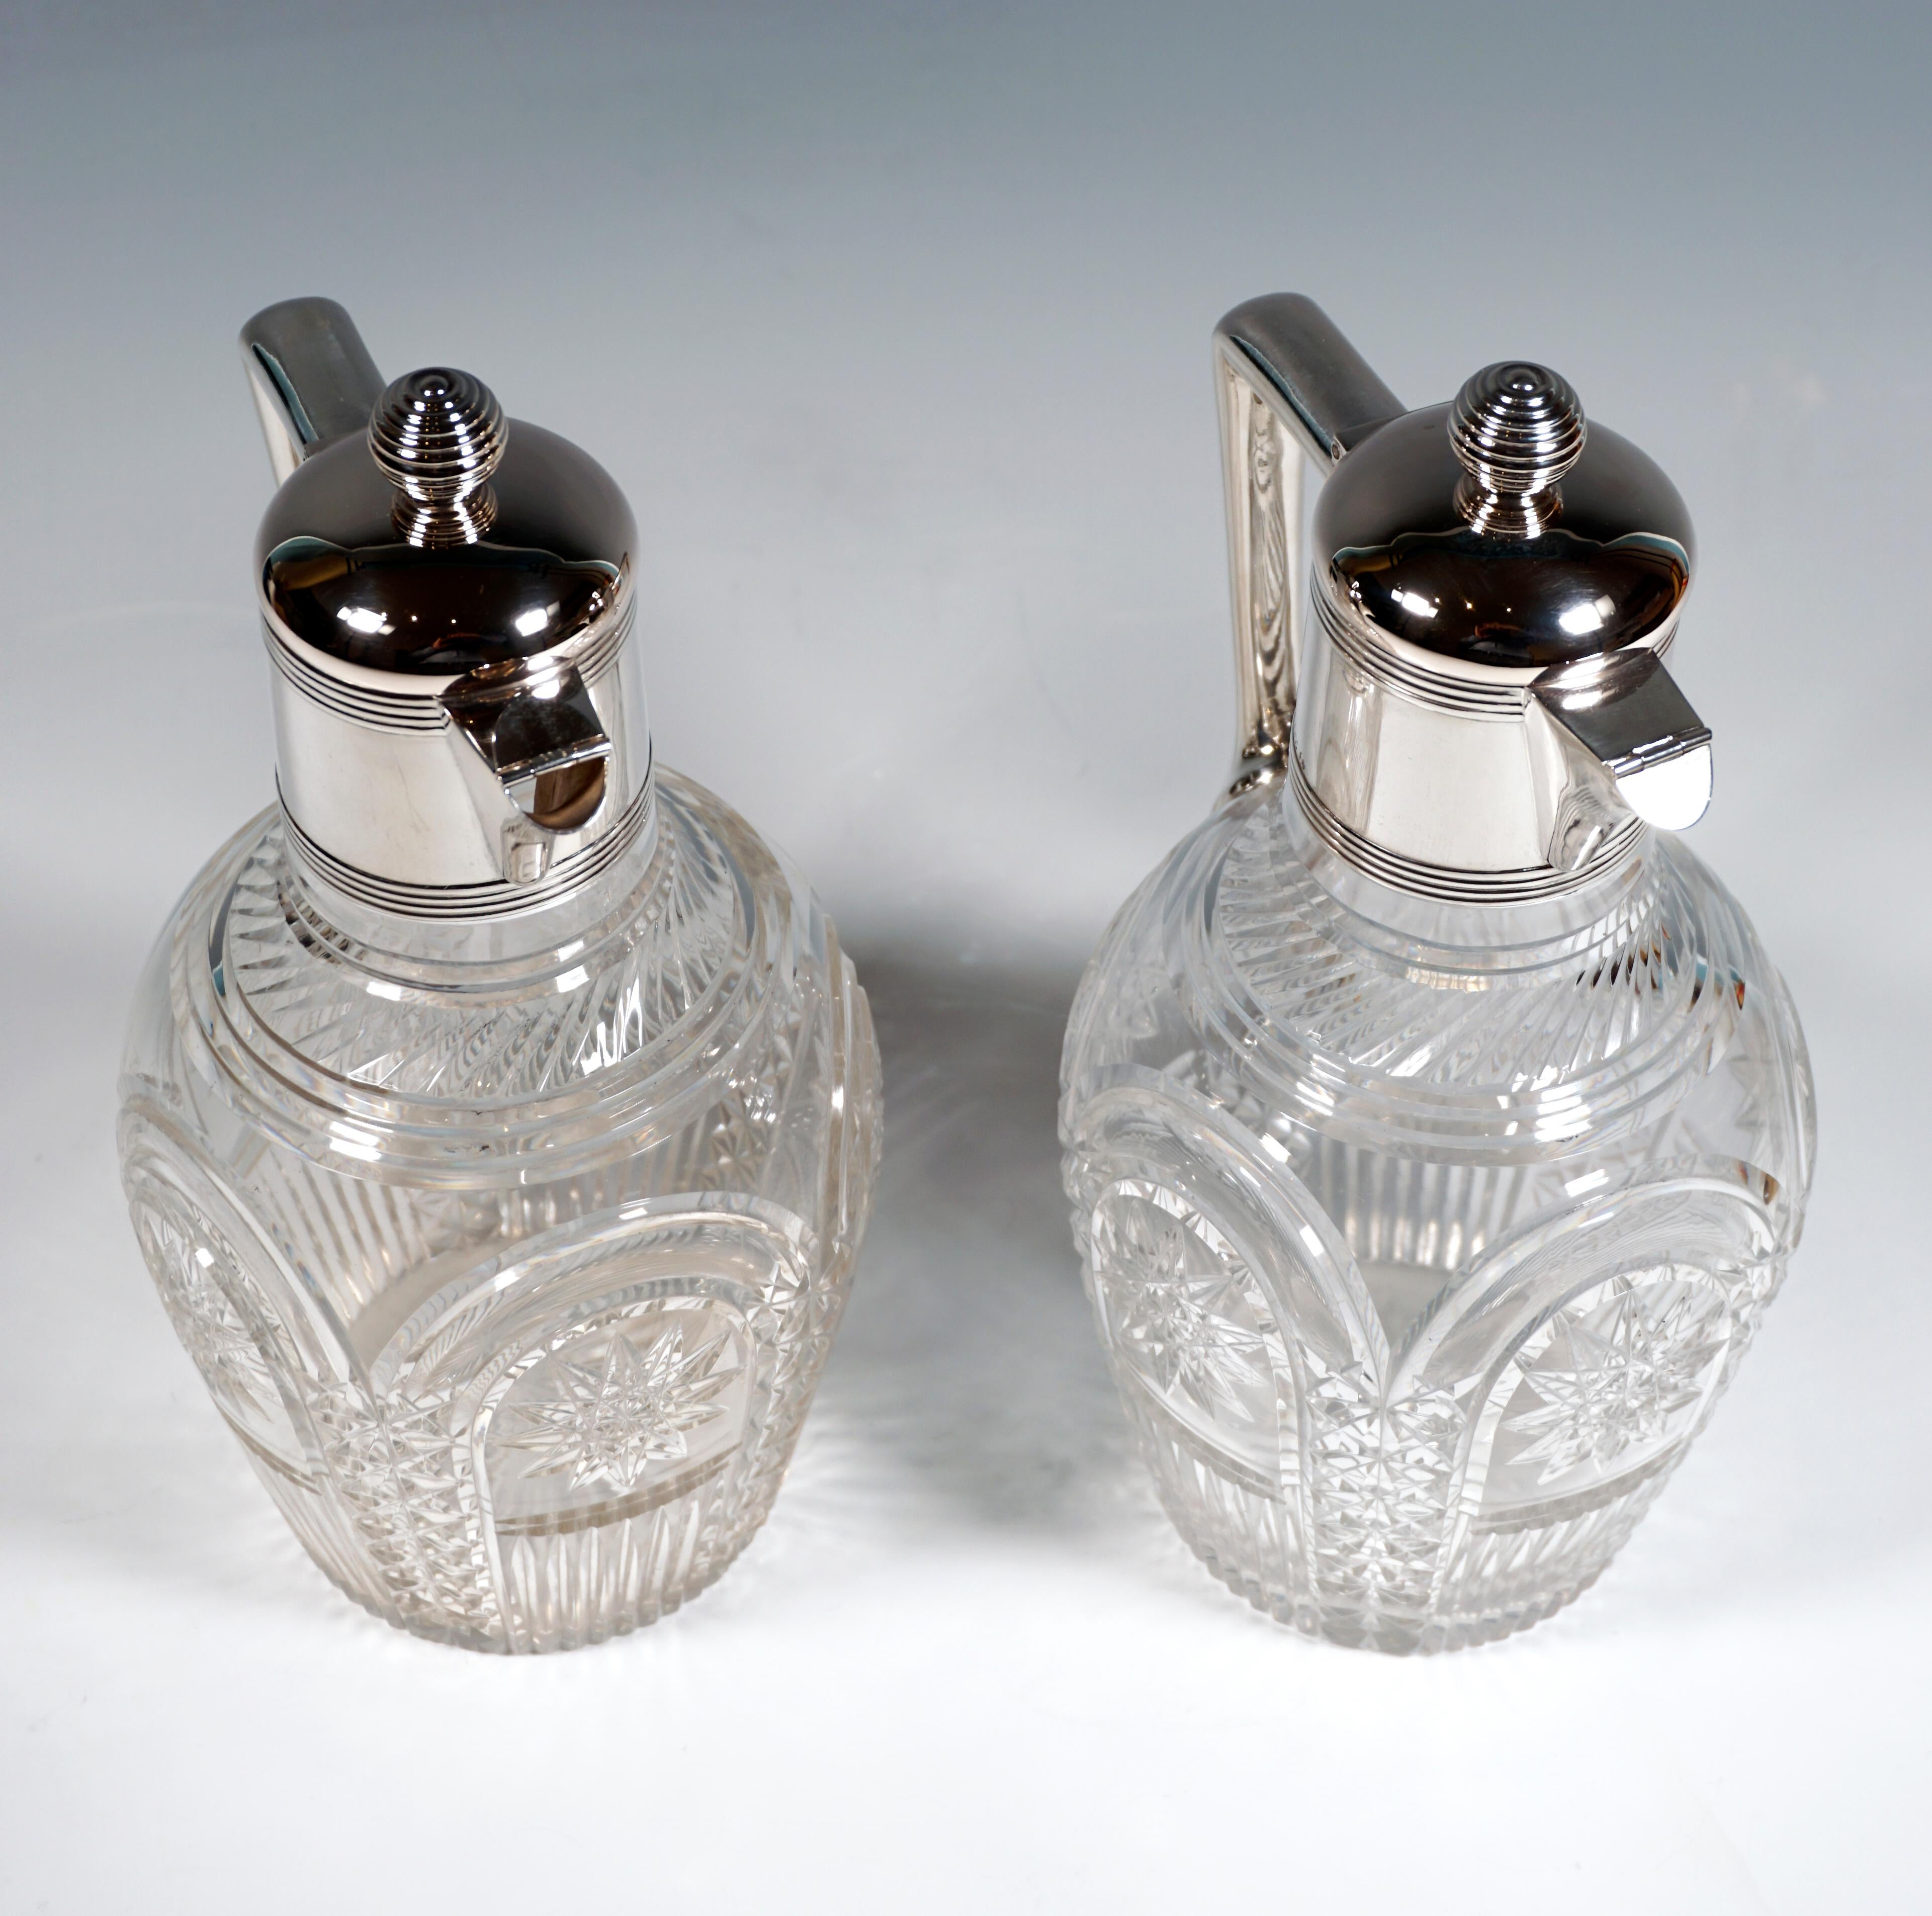 Early 20th Century Pair of Art Nouveau Glass Carafes with Silver Mounts, Koch & Bergfeld, Germany For Sale